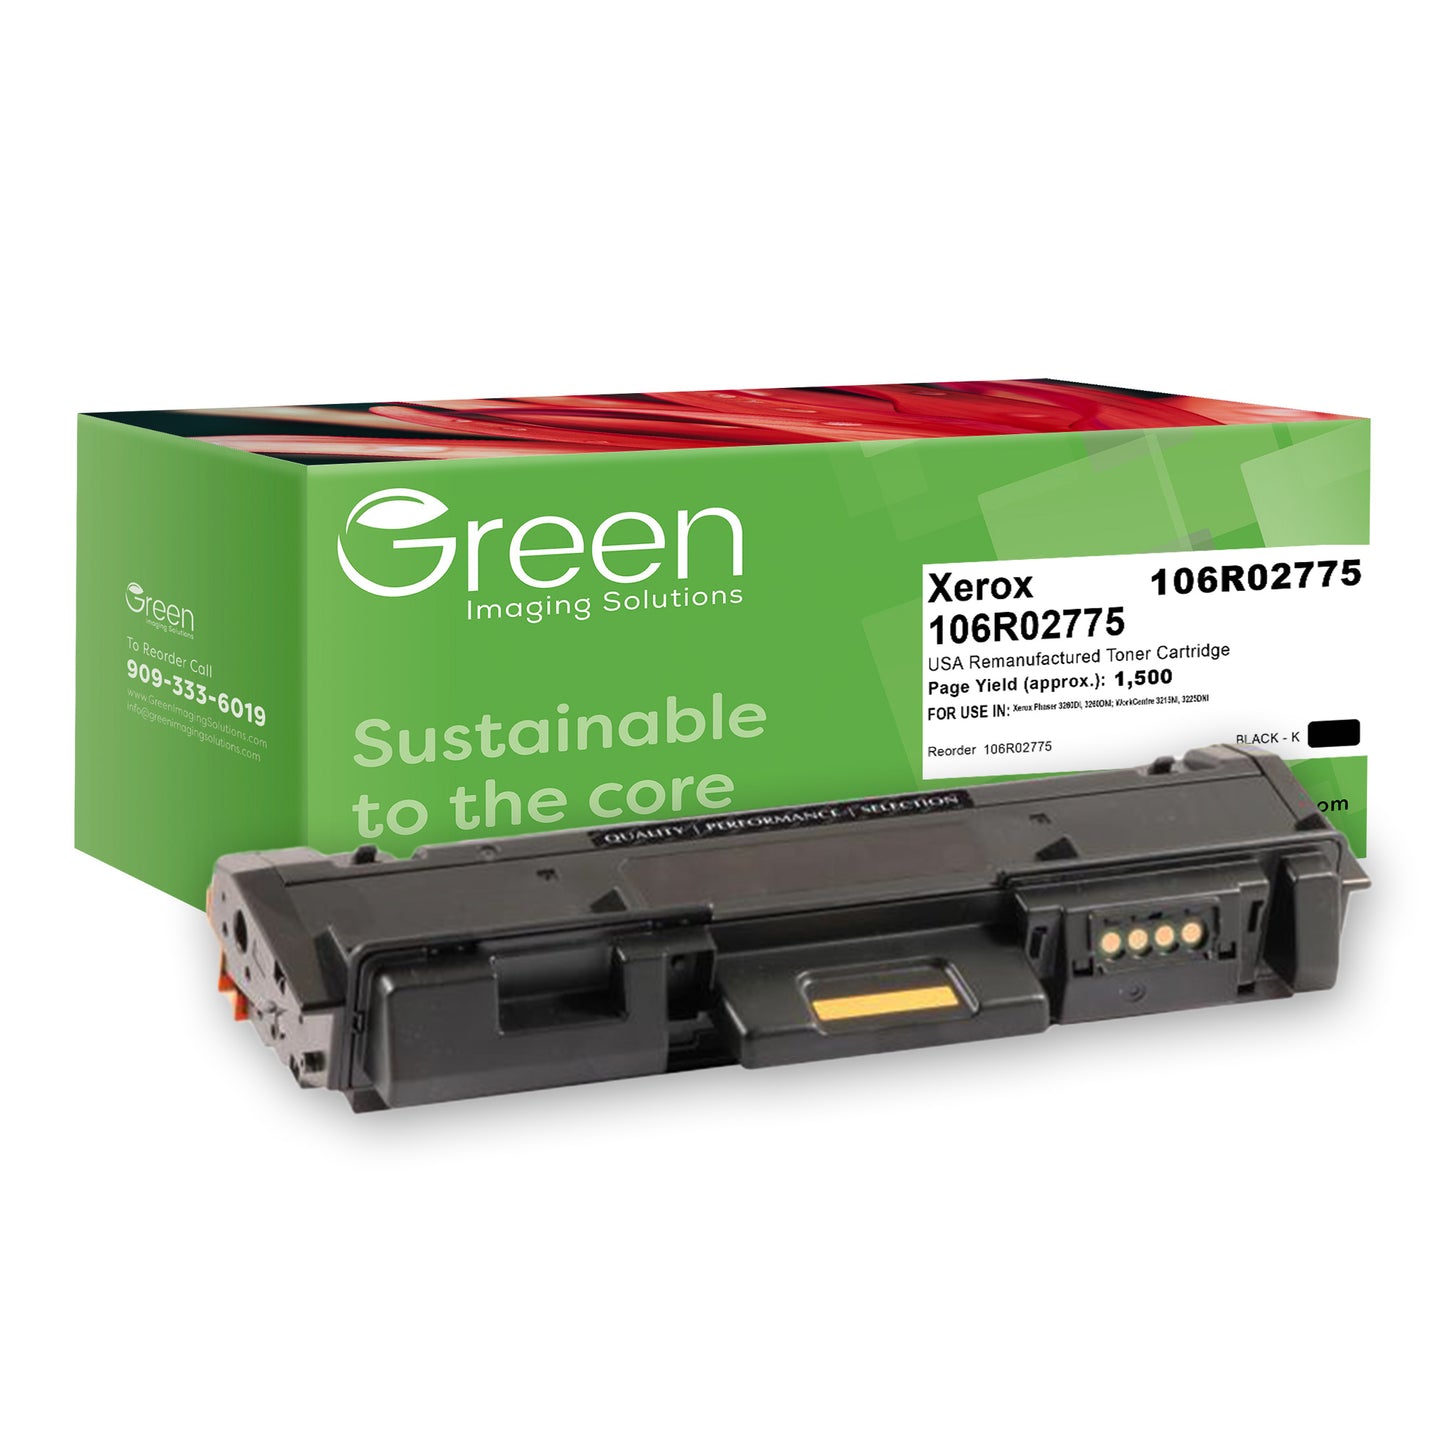 Green Imaging Solutions USA Remanufactured Toner Cartridge for Xerox 106R02775